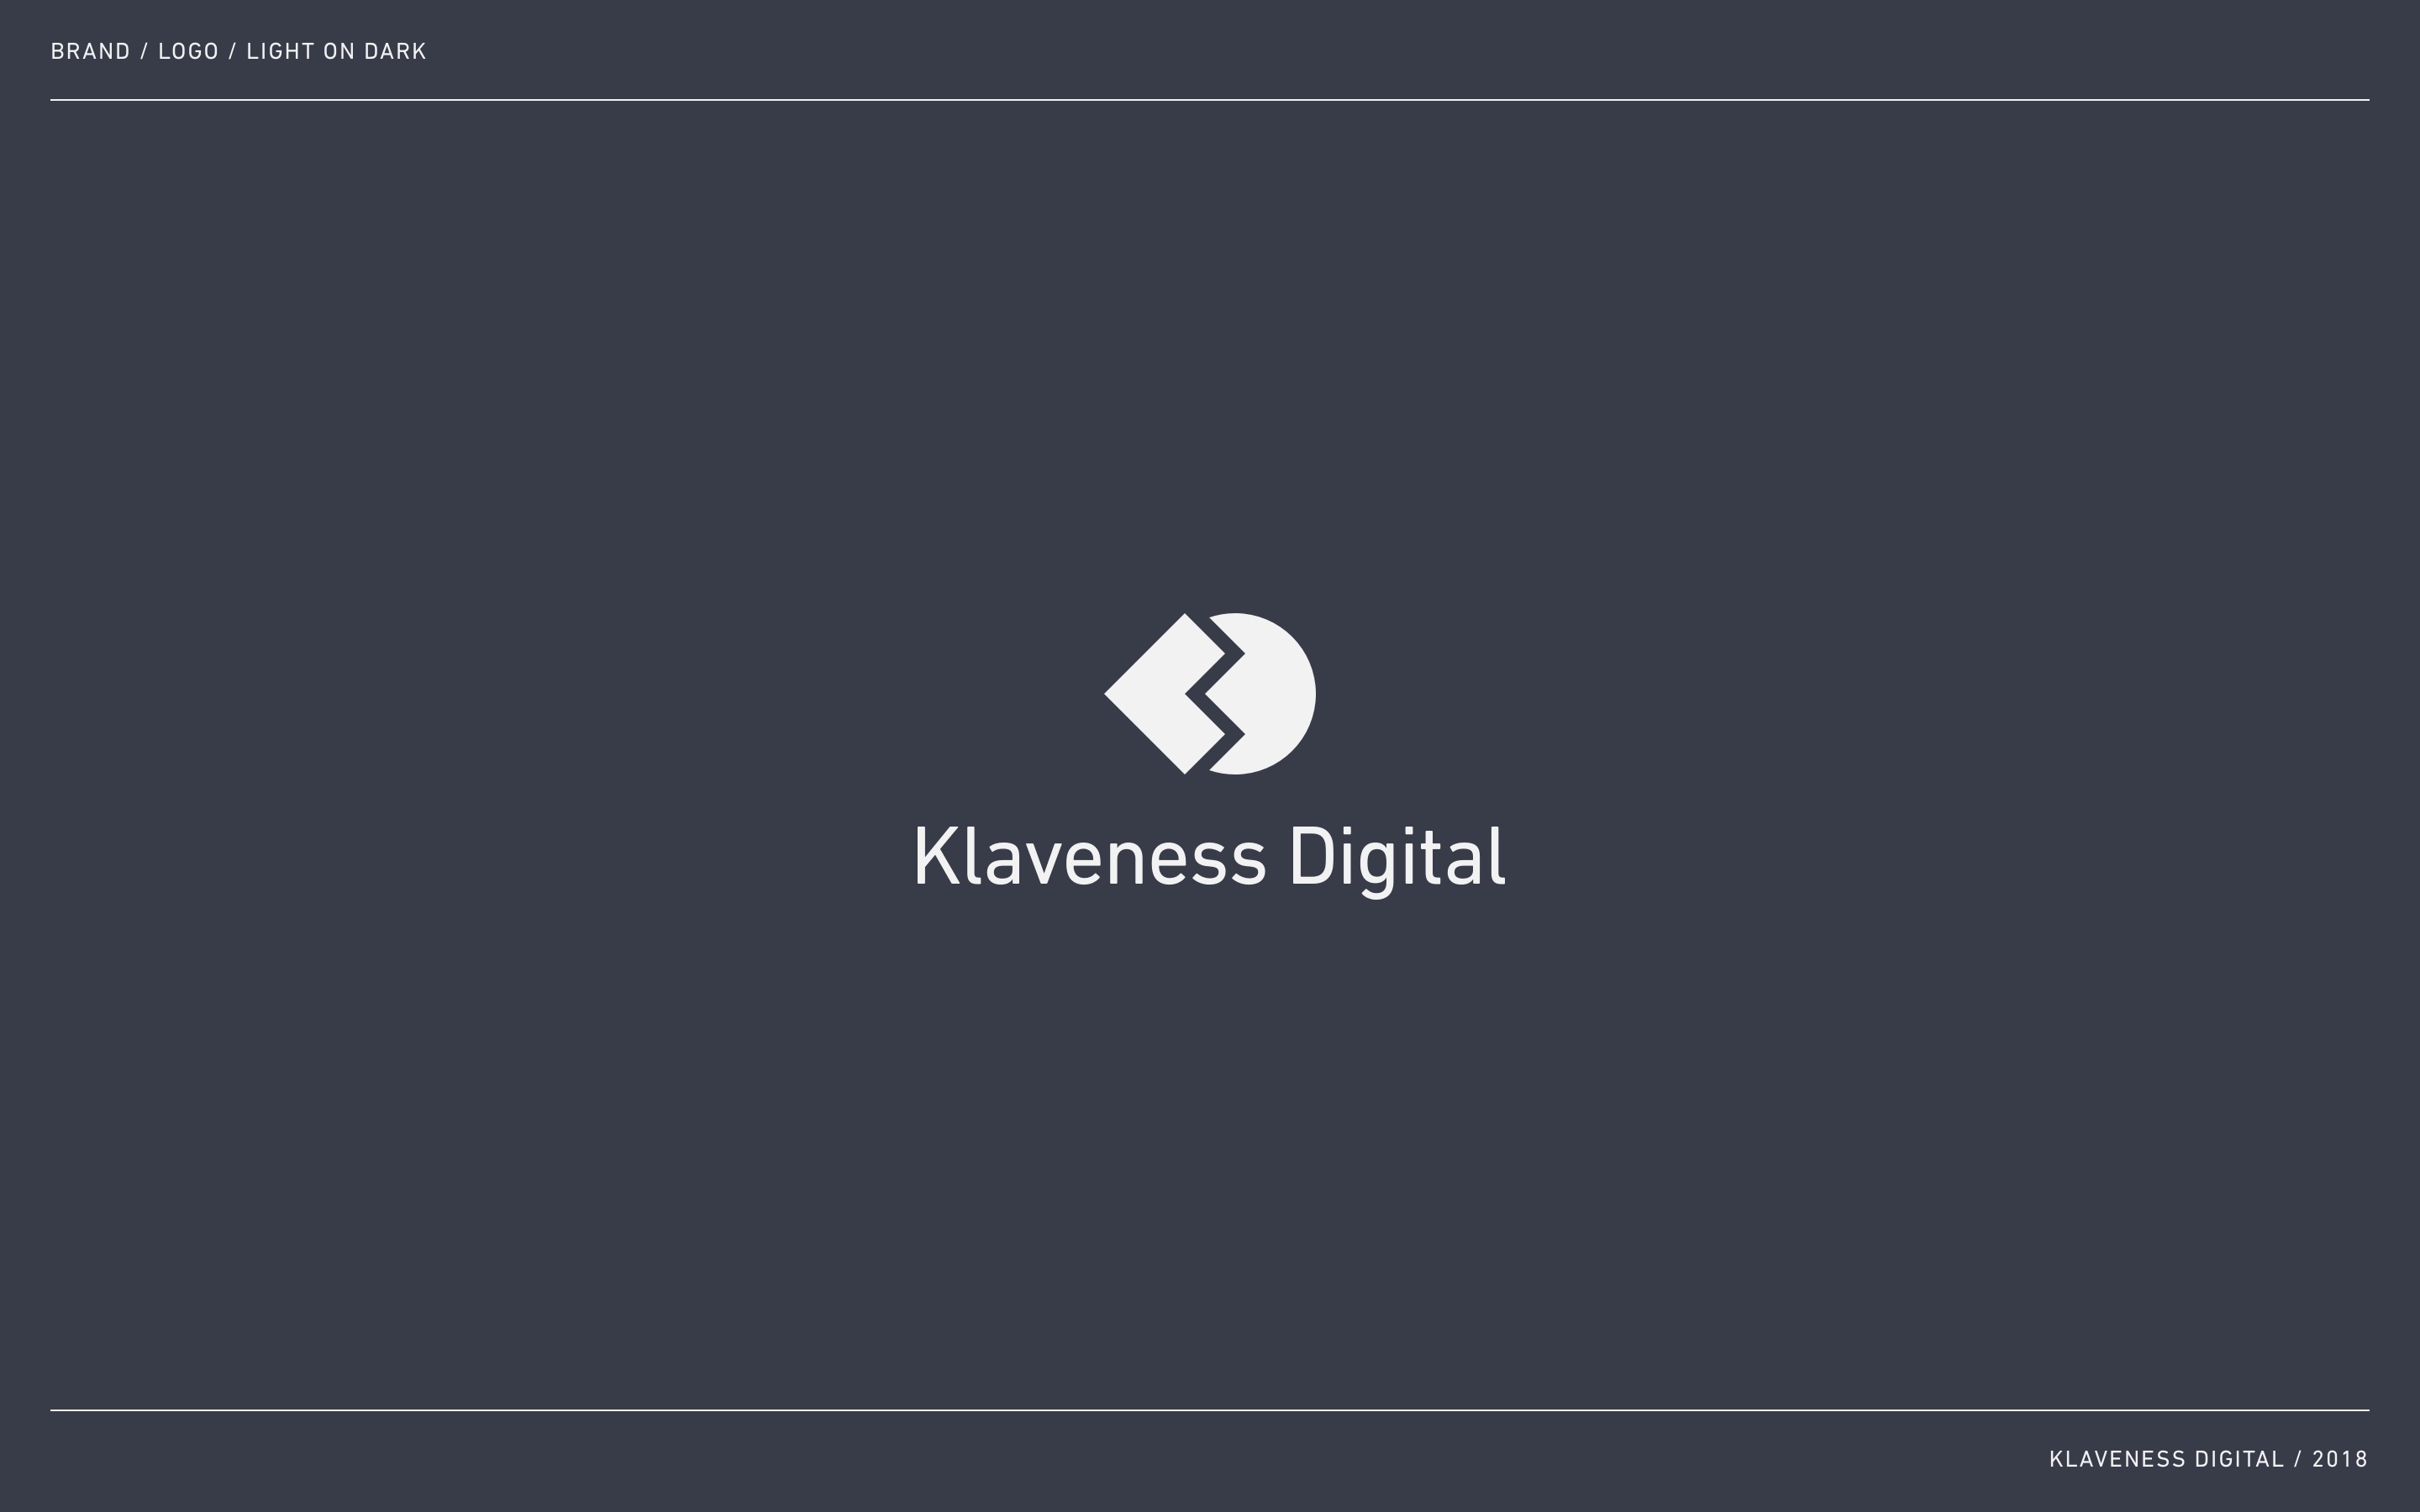 The icon and wordmark on a desaturated dark blue background